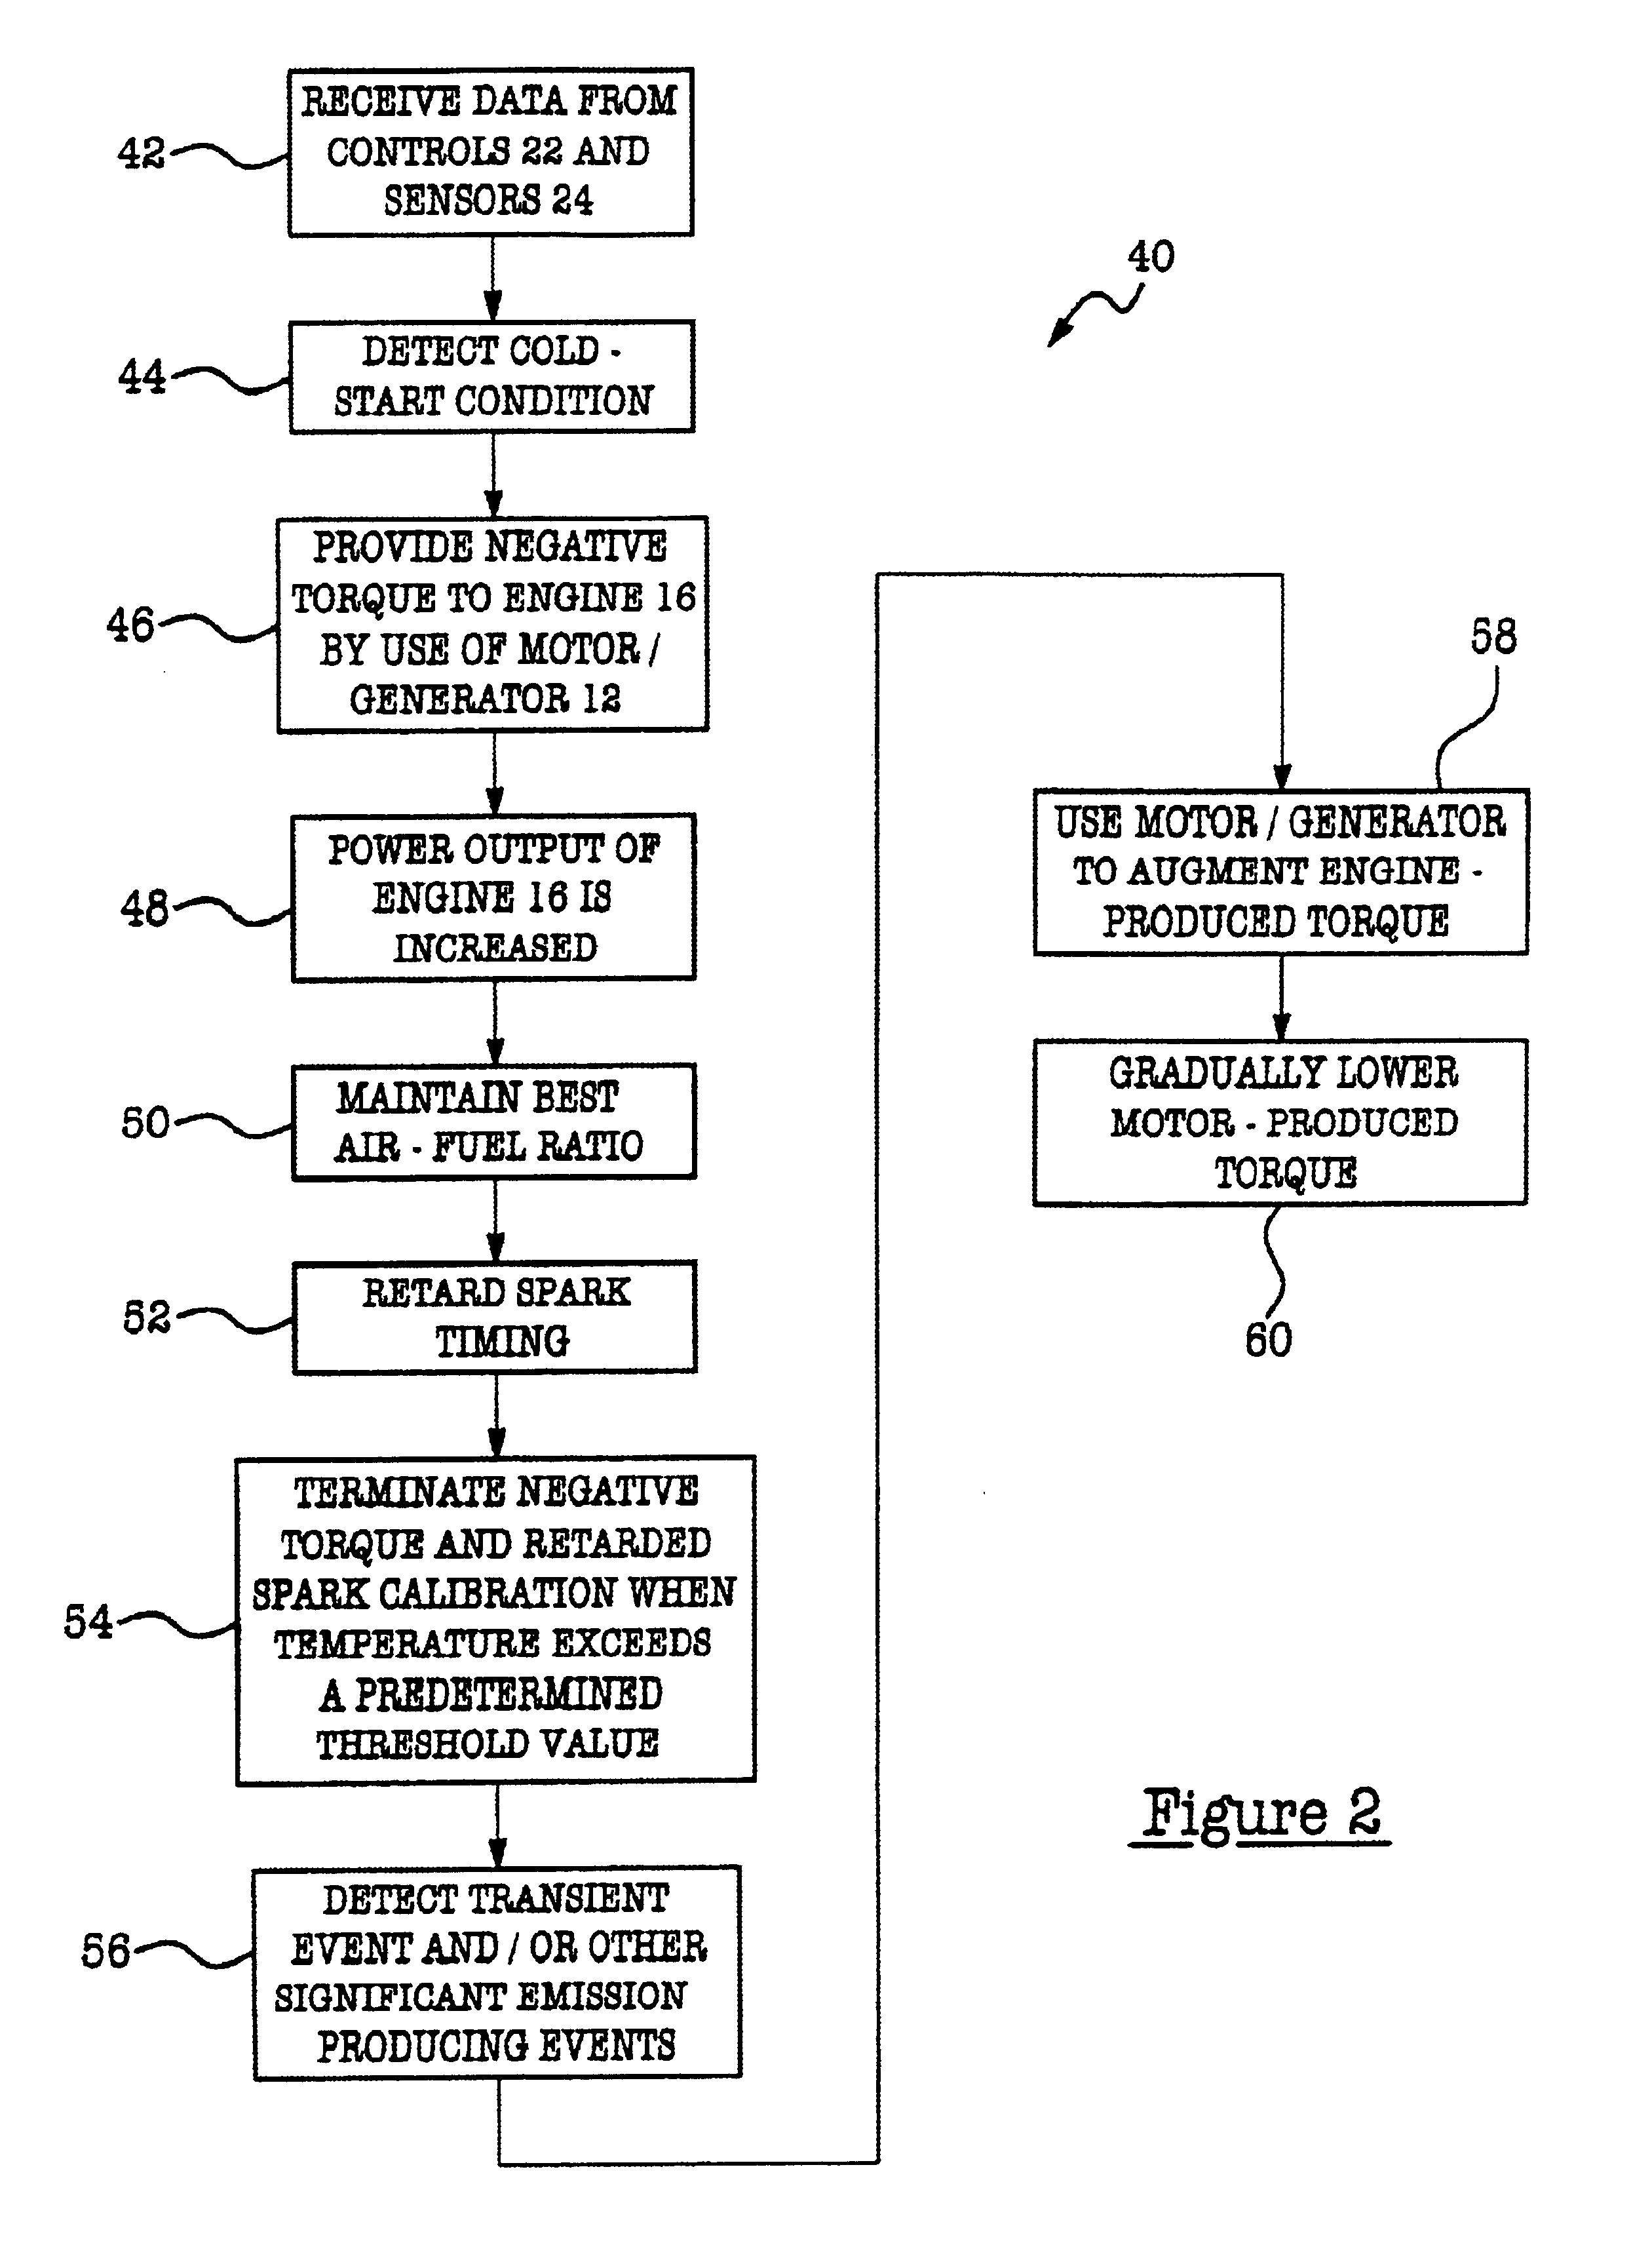 Method of operating a hybrid electric vehicle to reduce emissions